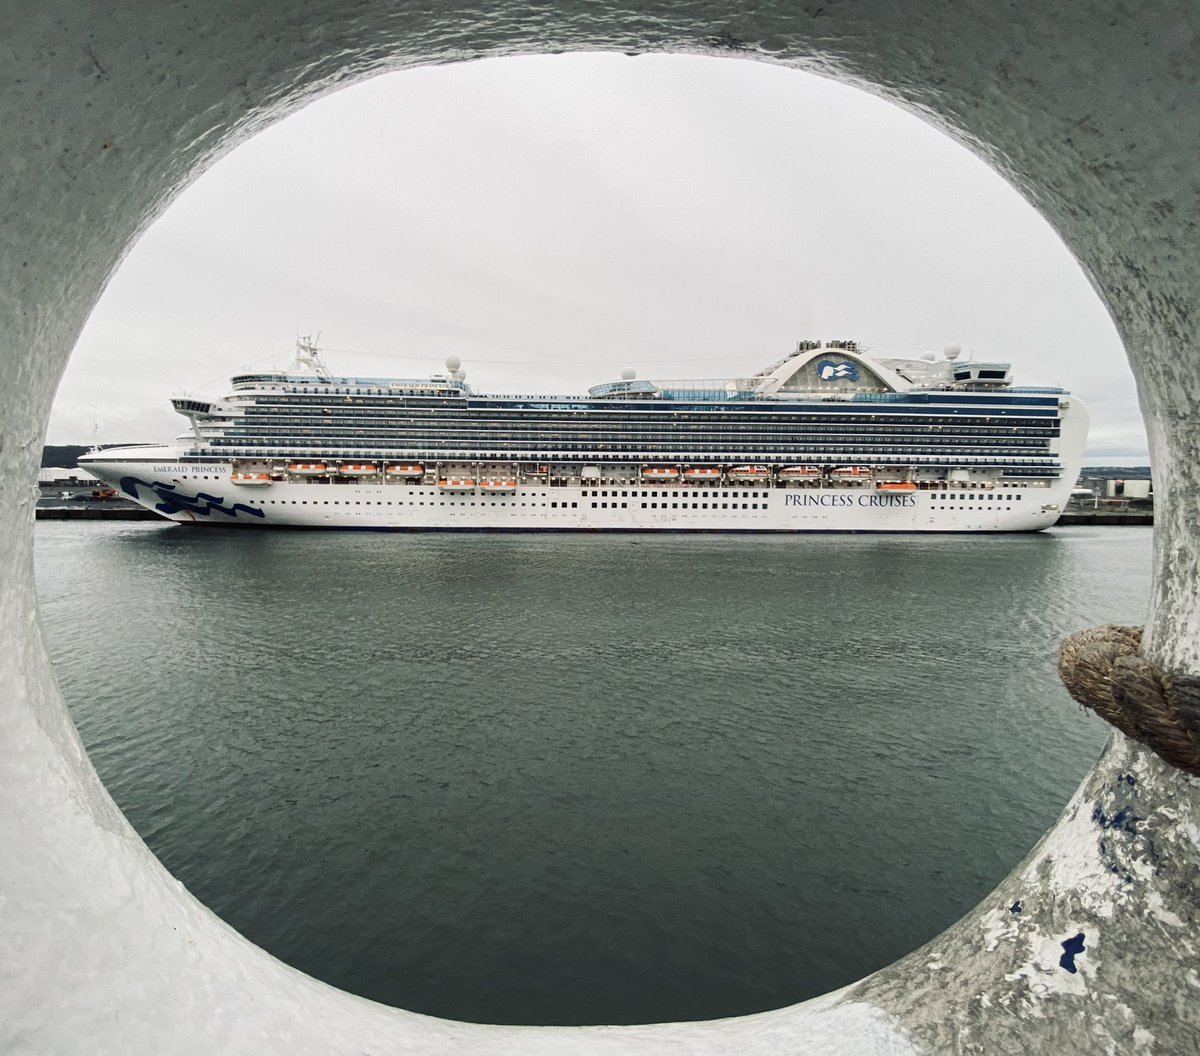 Is this the final visit to @BelfastHarbour this year for @PrincessCruises #EmeraldPrincess 🤔

Enjoy your day, the craic 🍀 the weather ☔️ the hospitality 🍻
#thruthefairlead 📸

📸WixPix@Sea